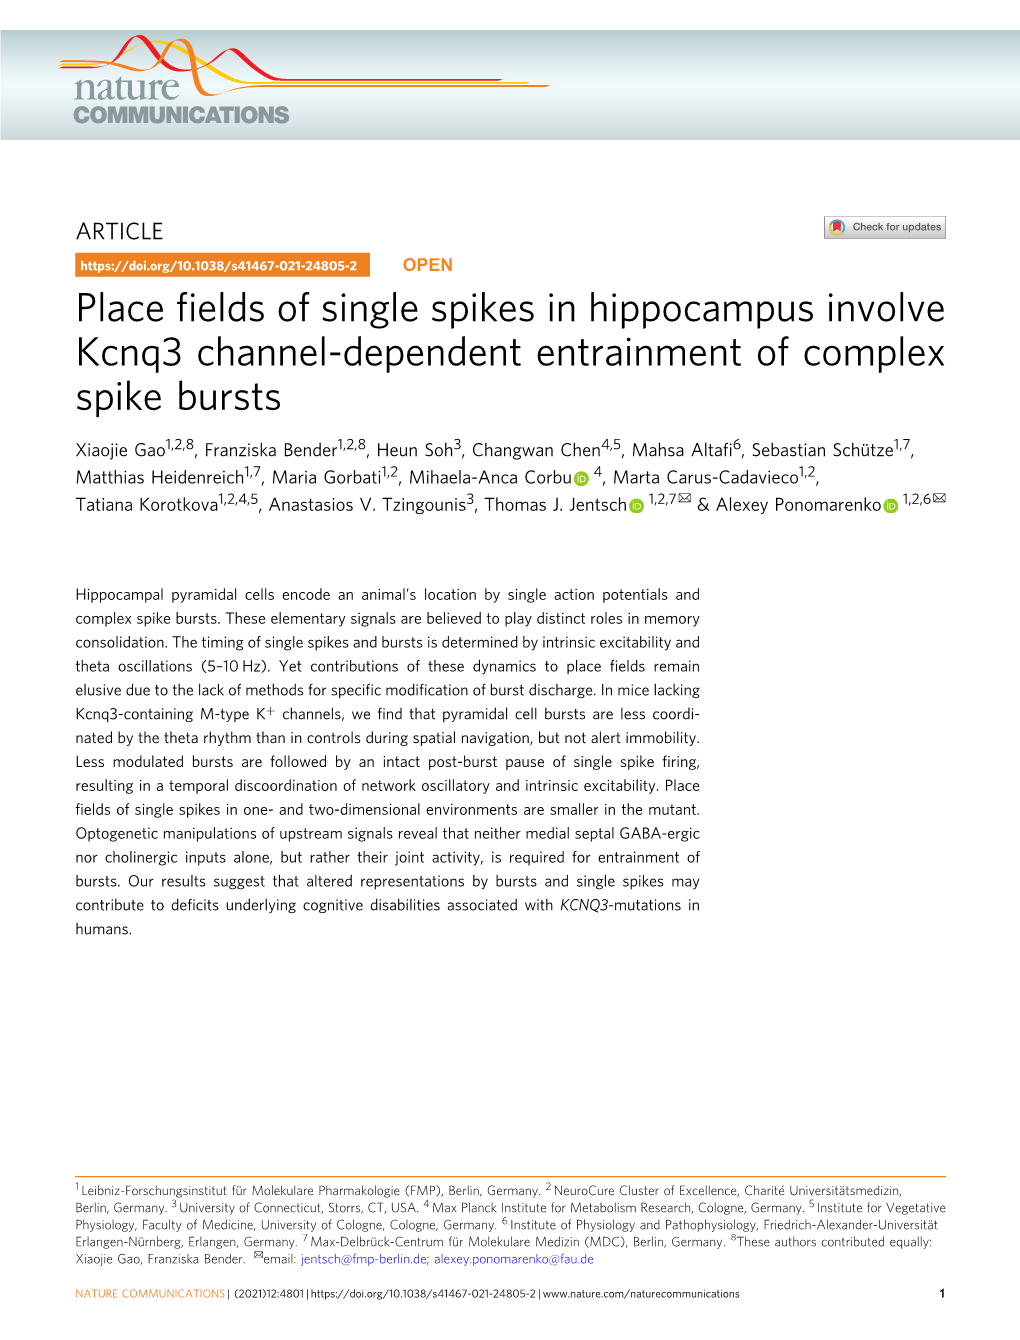 Place Fields of Single Spikes in Hippocampus Involve Kcnq3